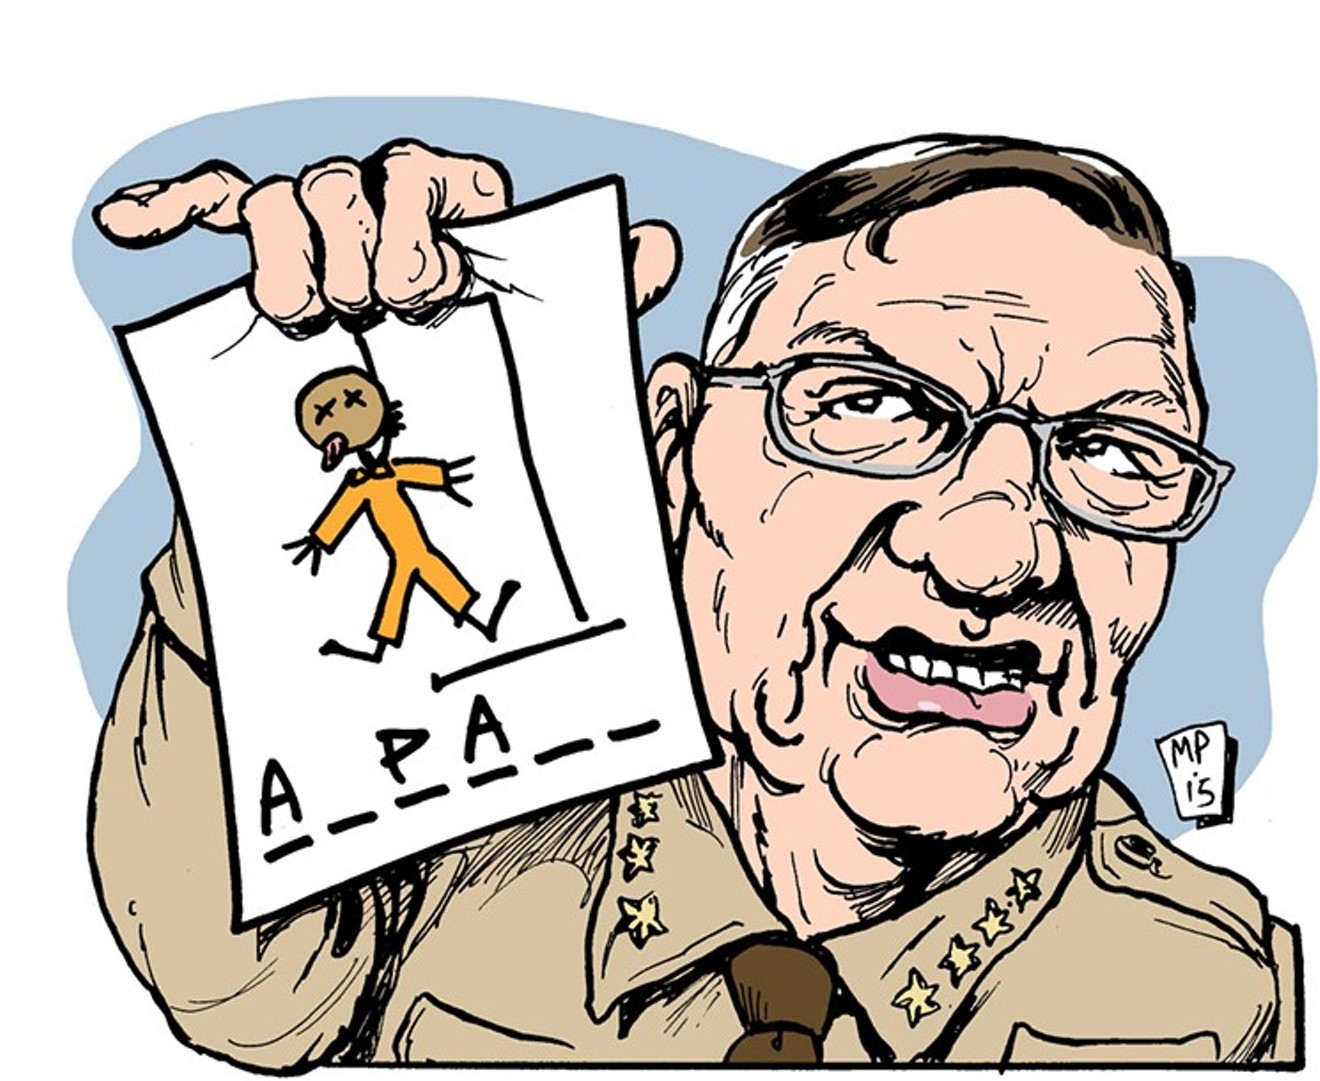 A blast from the past: New Times found a disproportionate number of hanging deaths in Joe Arpaio's jail